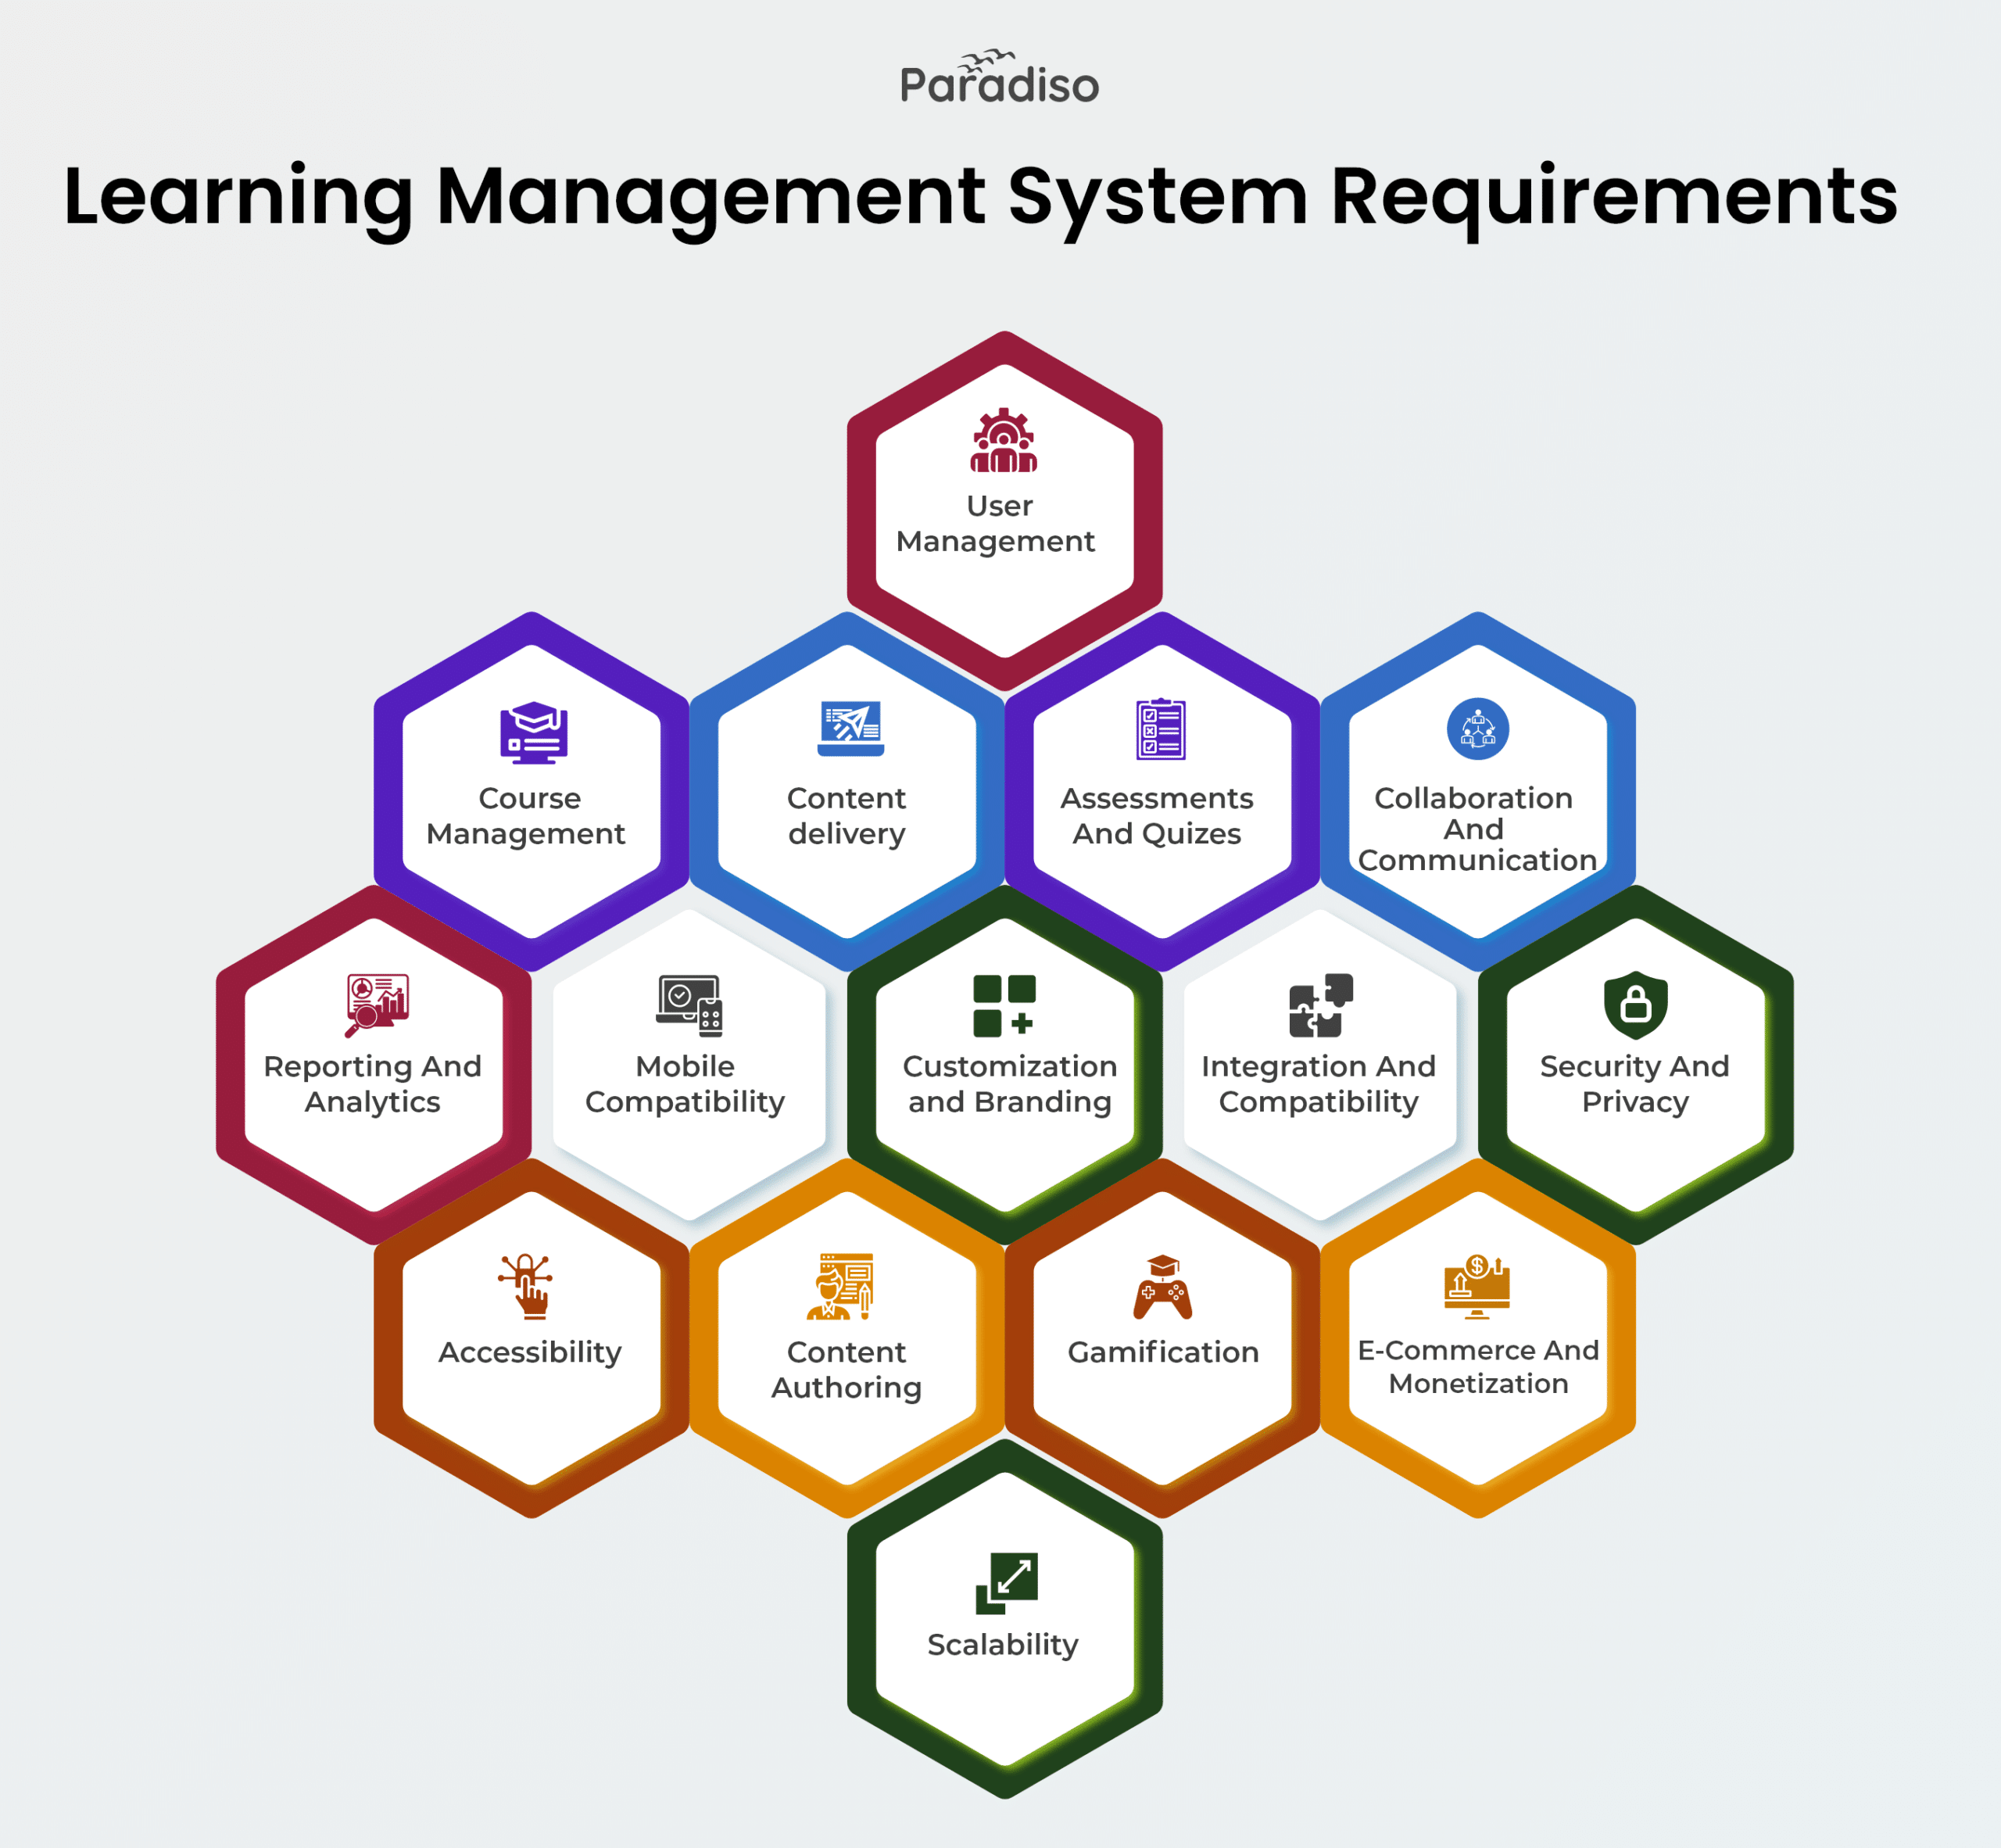 Learning Management System (LMS) Requirements